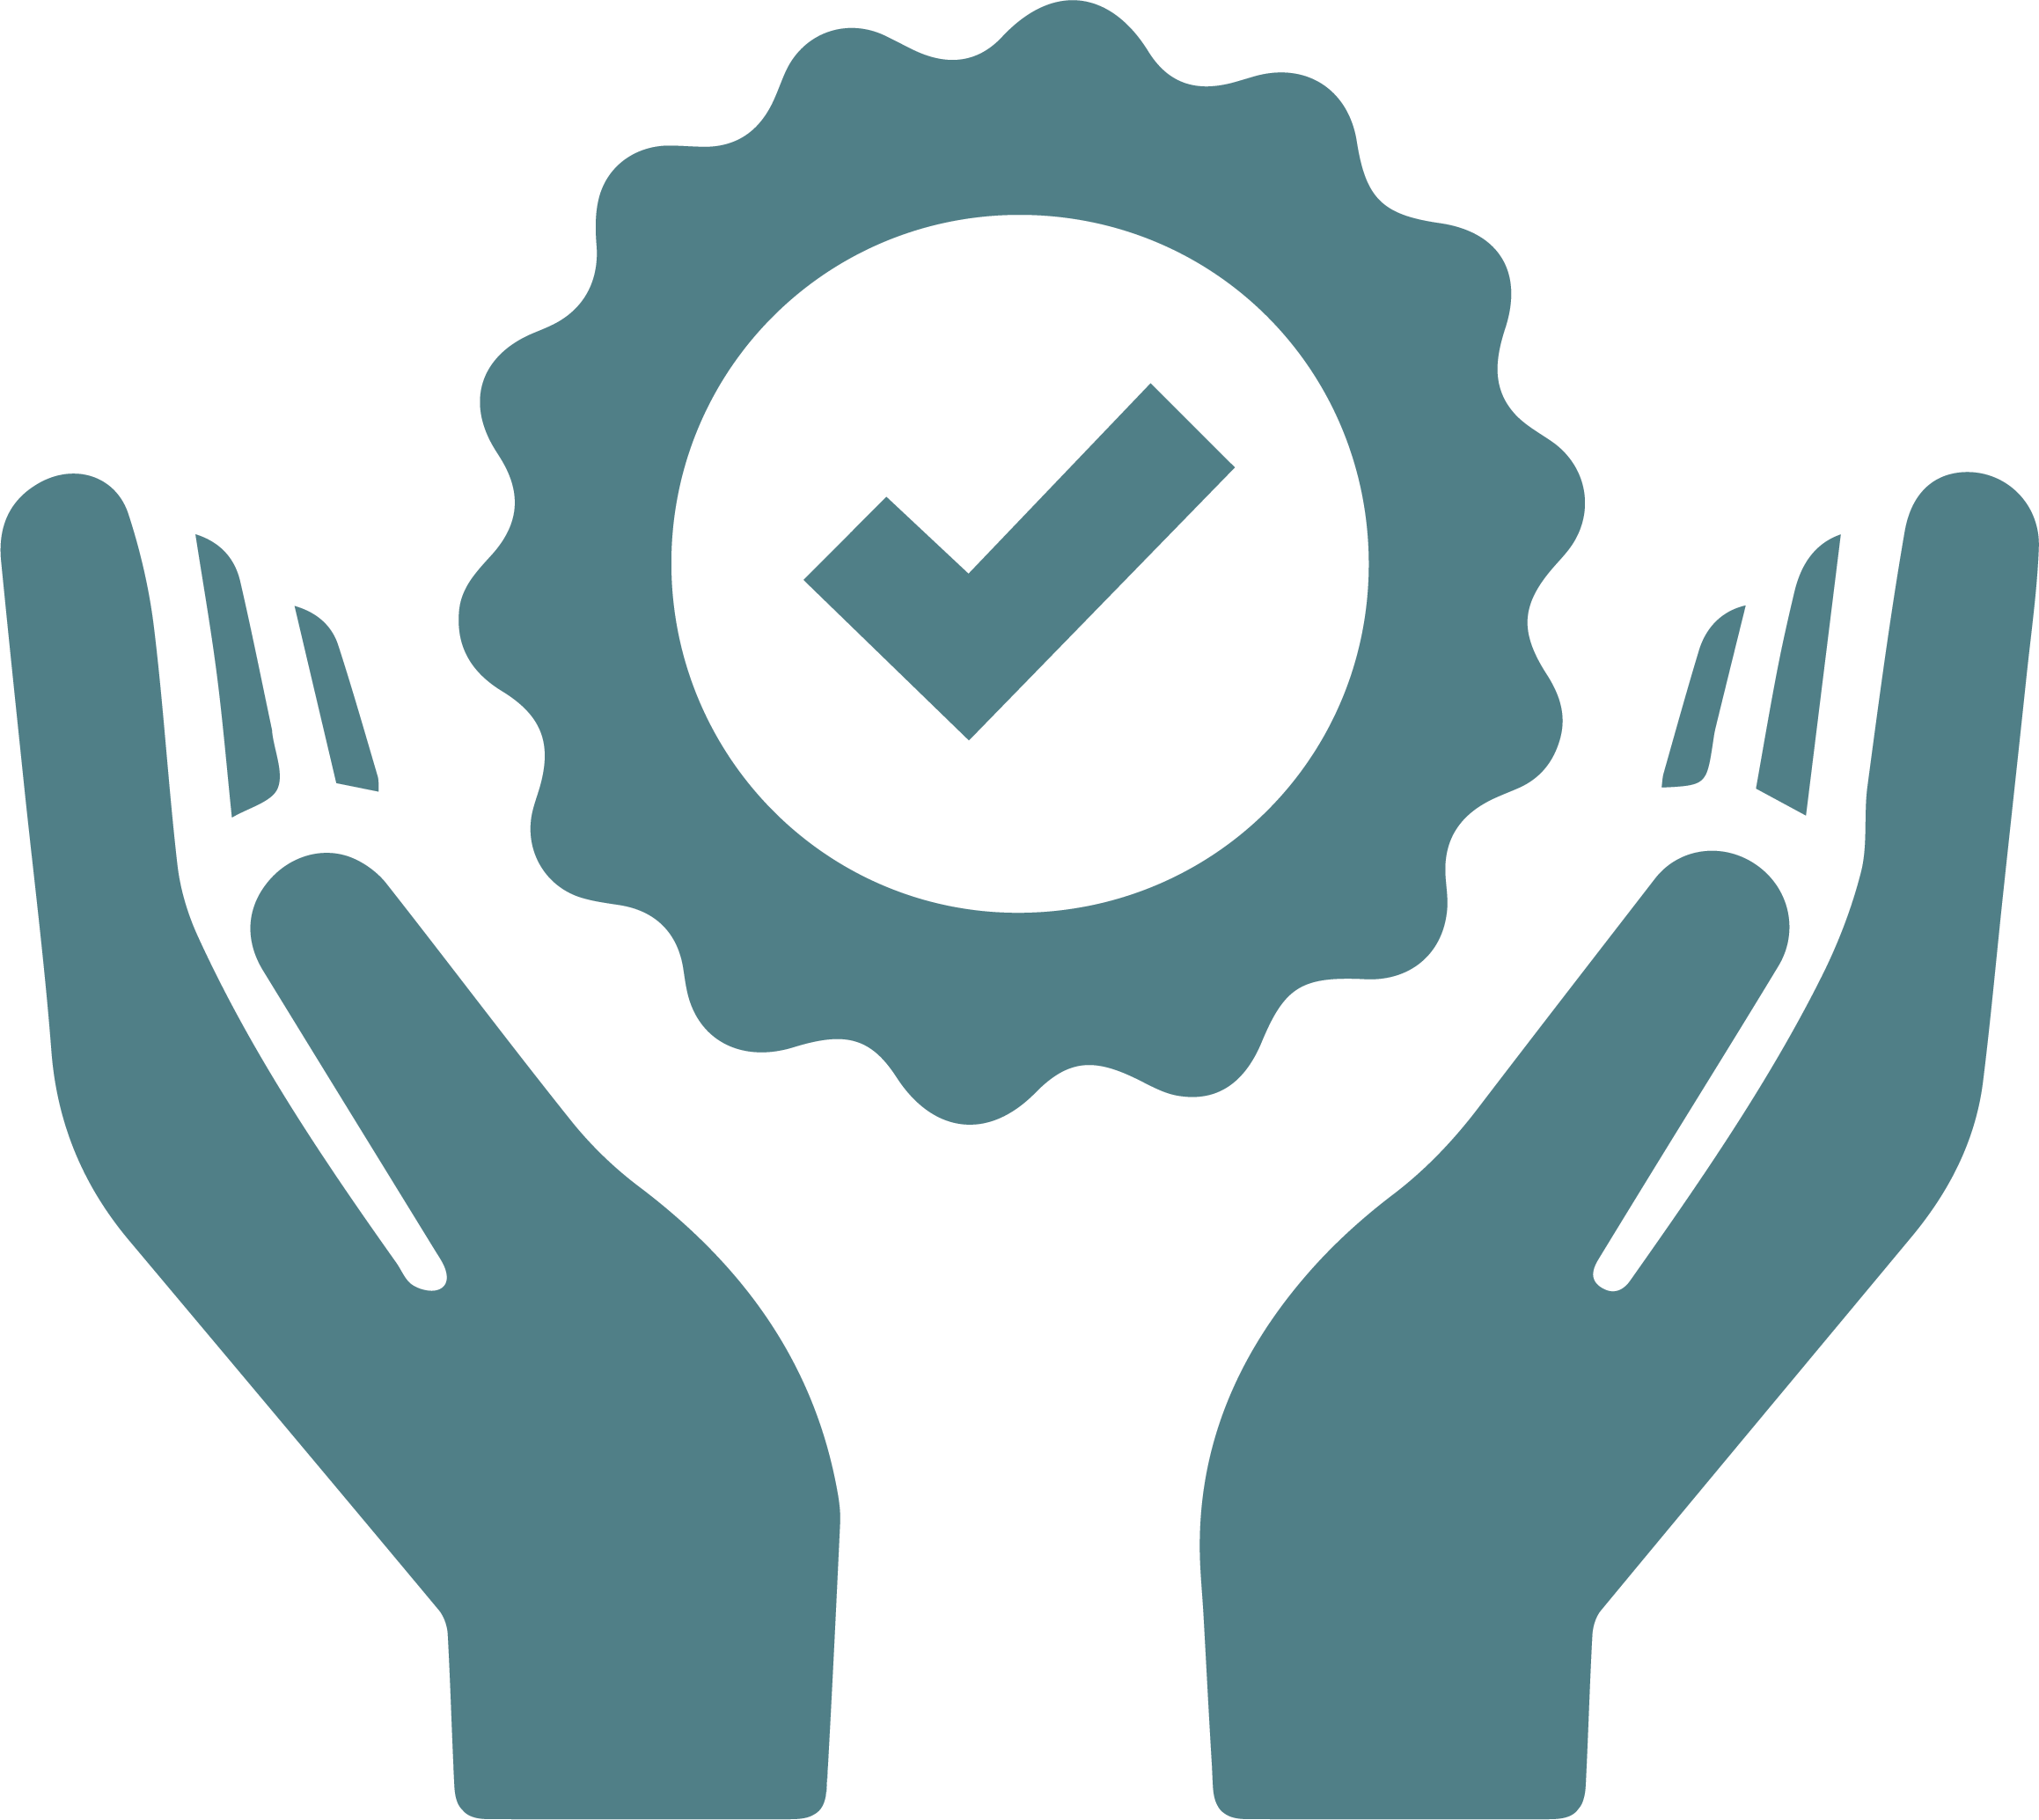 An icon showing two hands and a rosette containing a tick mark.